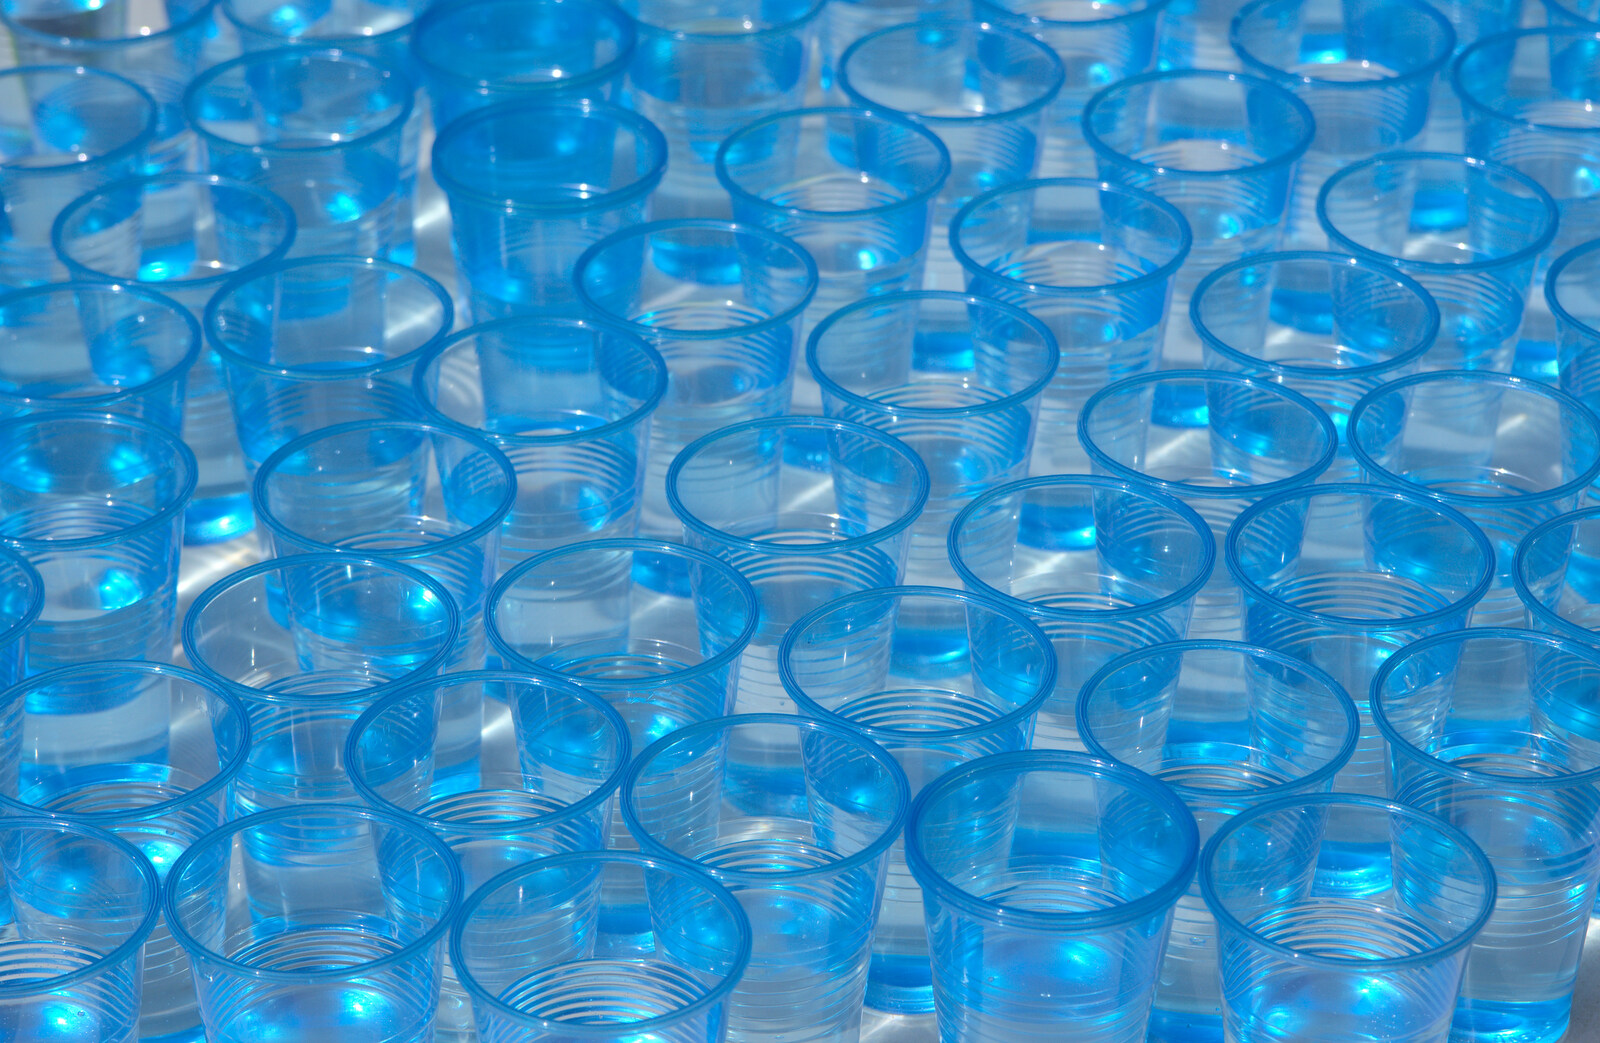 A hundred plastic cups of water await from The Framlingham 10k Run, Suffolk - 31st August 2014